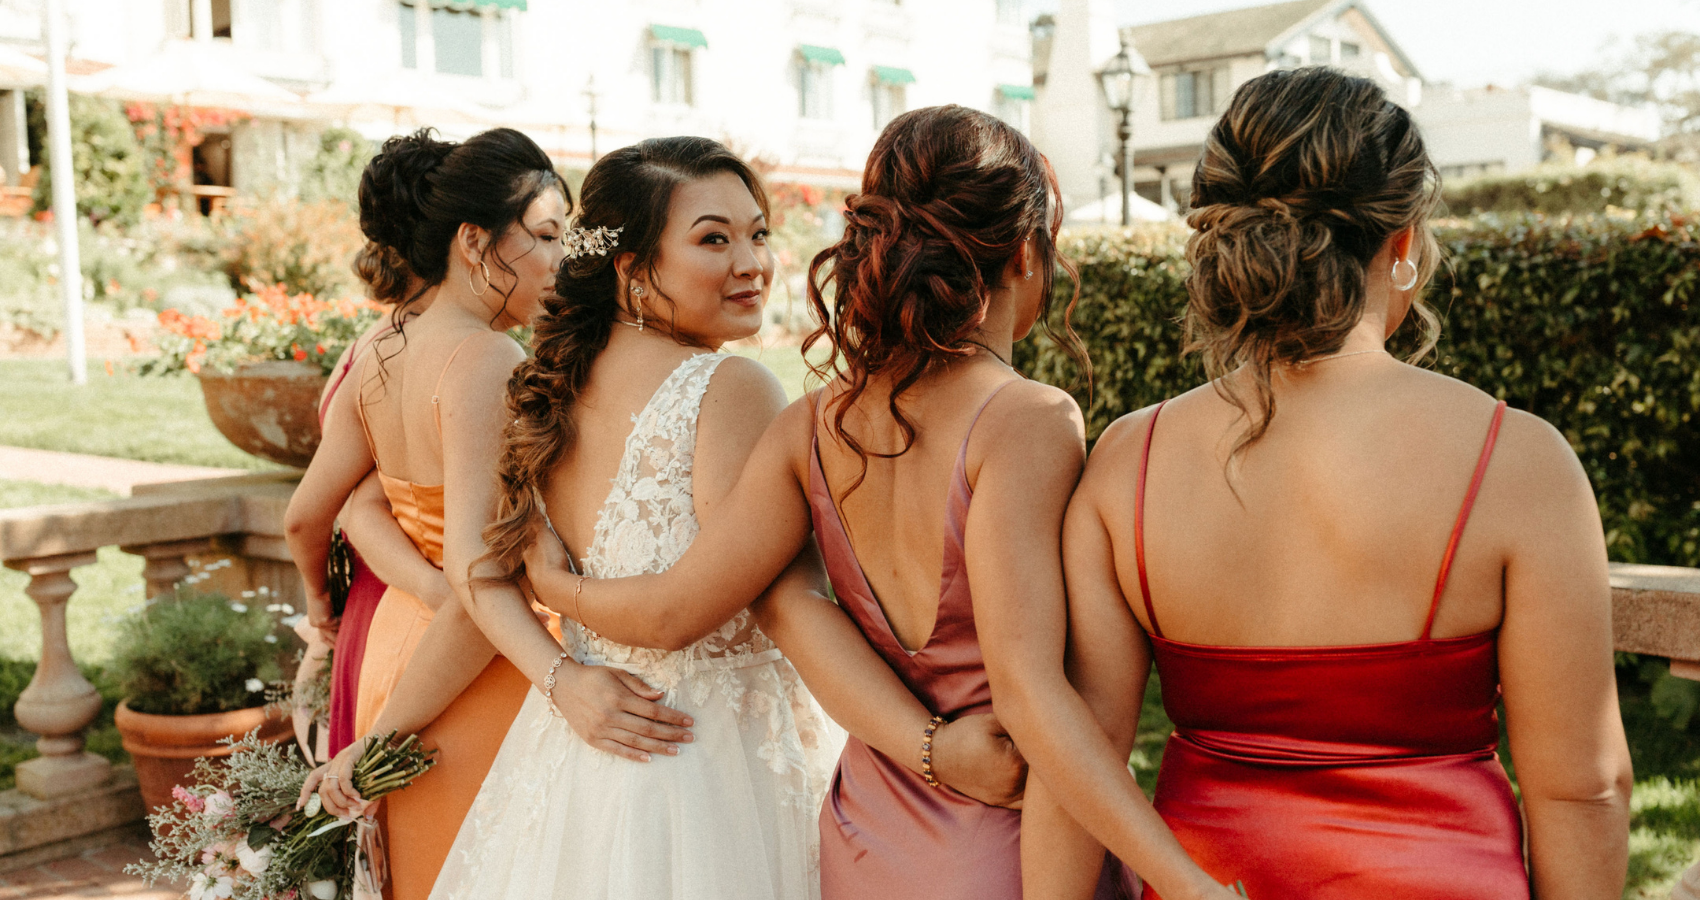 Bride In Lace A Line Wedding Dress Called Minerva By Rebecca Ingram With Bridesmaids In Maroon And Red